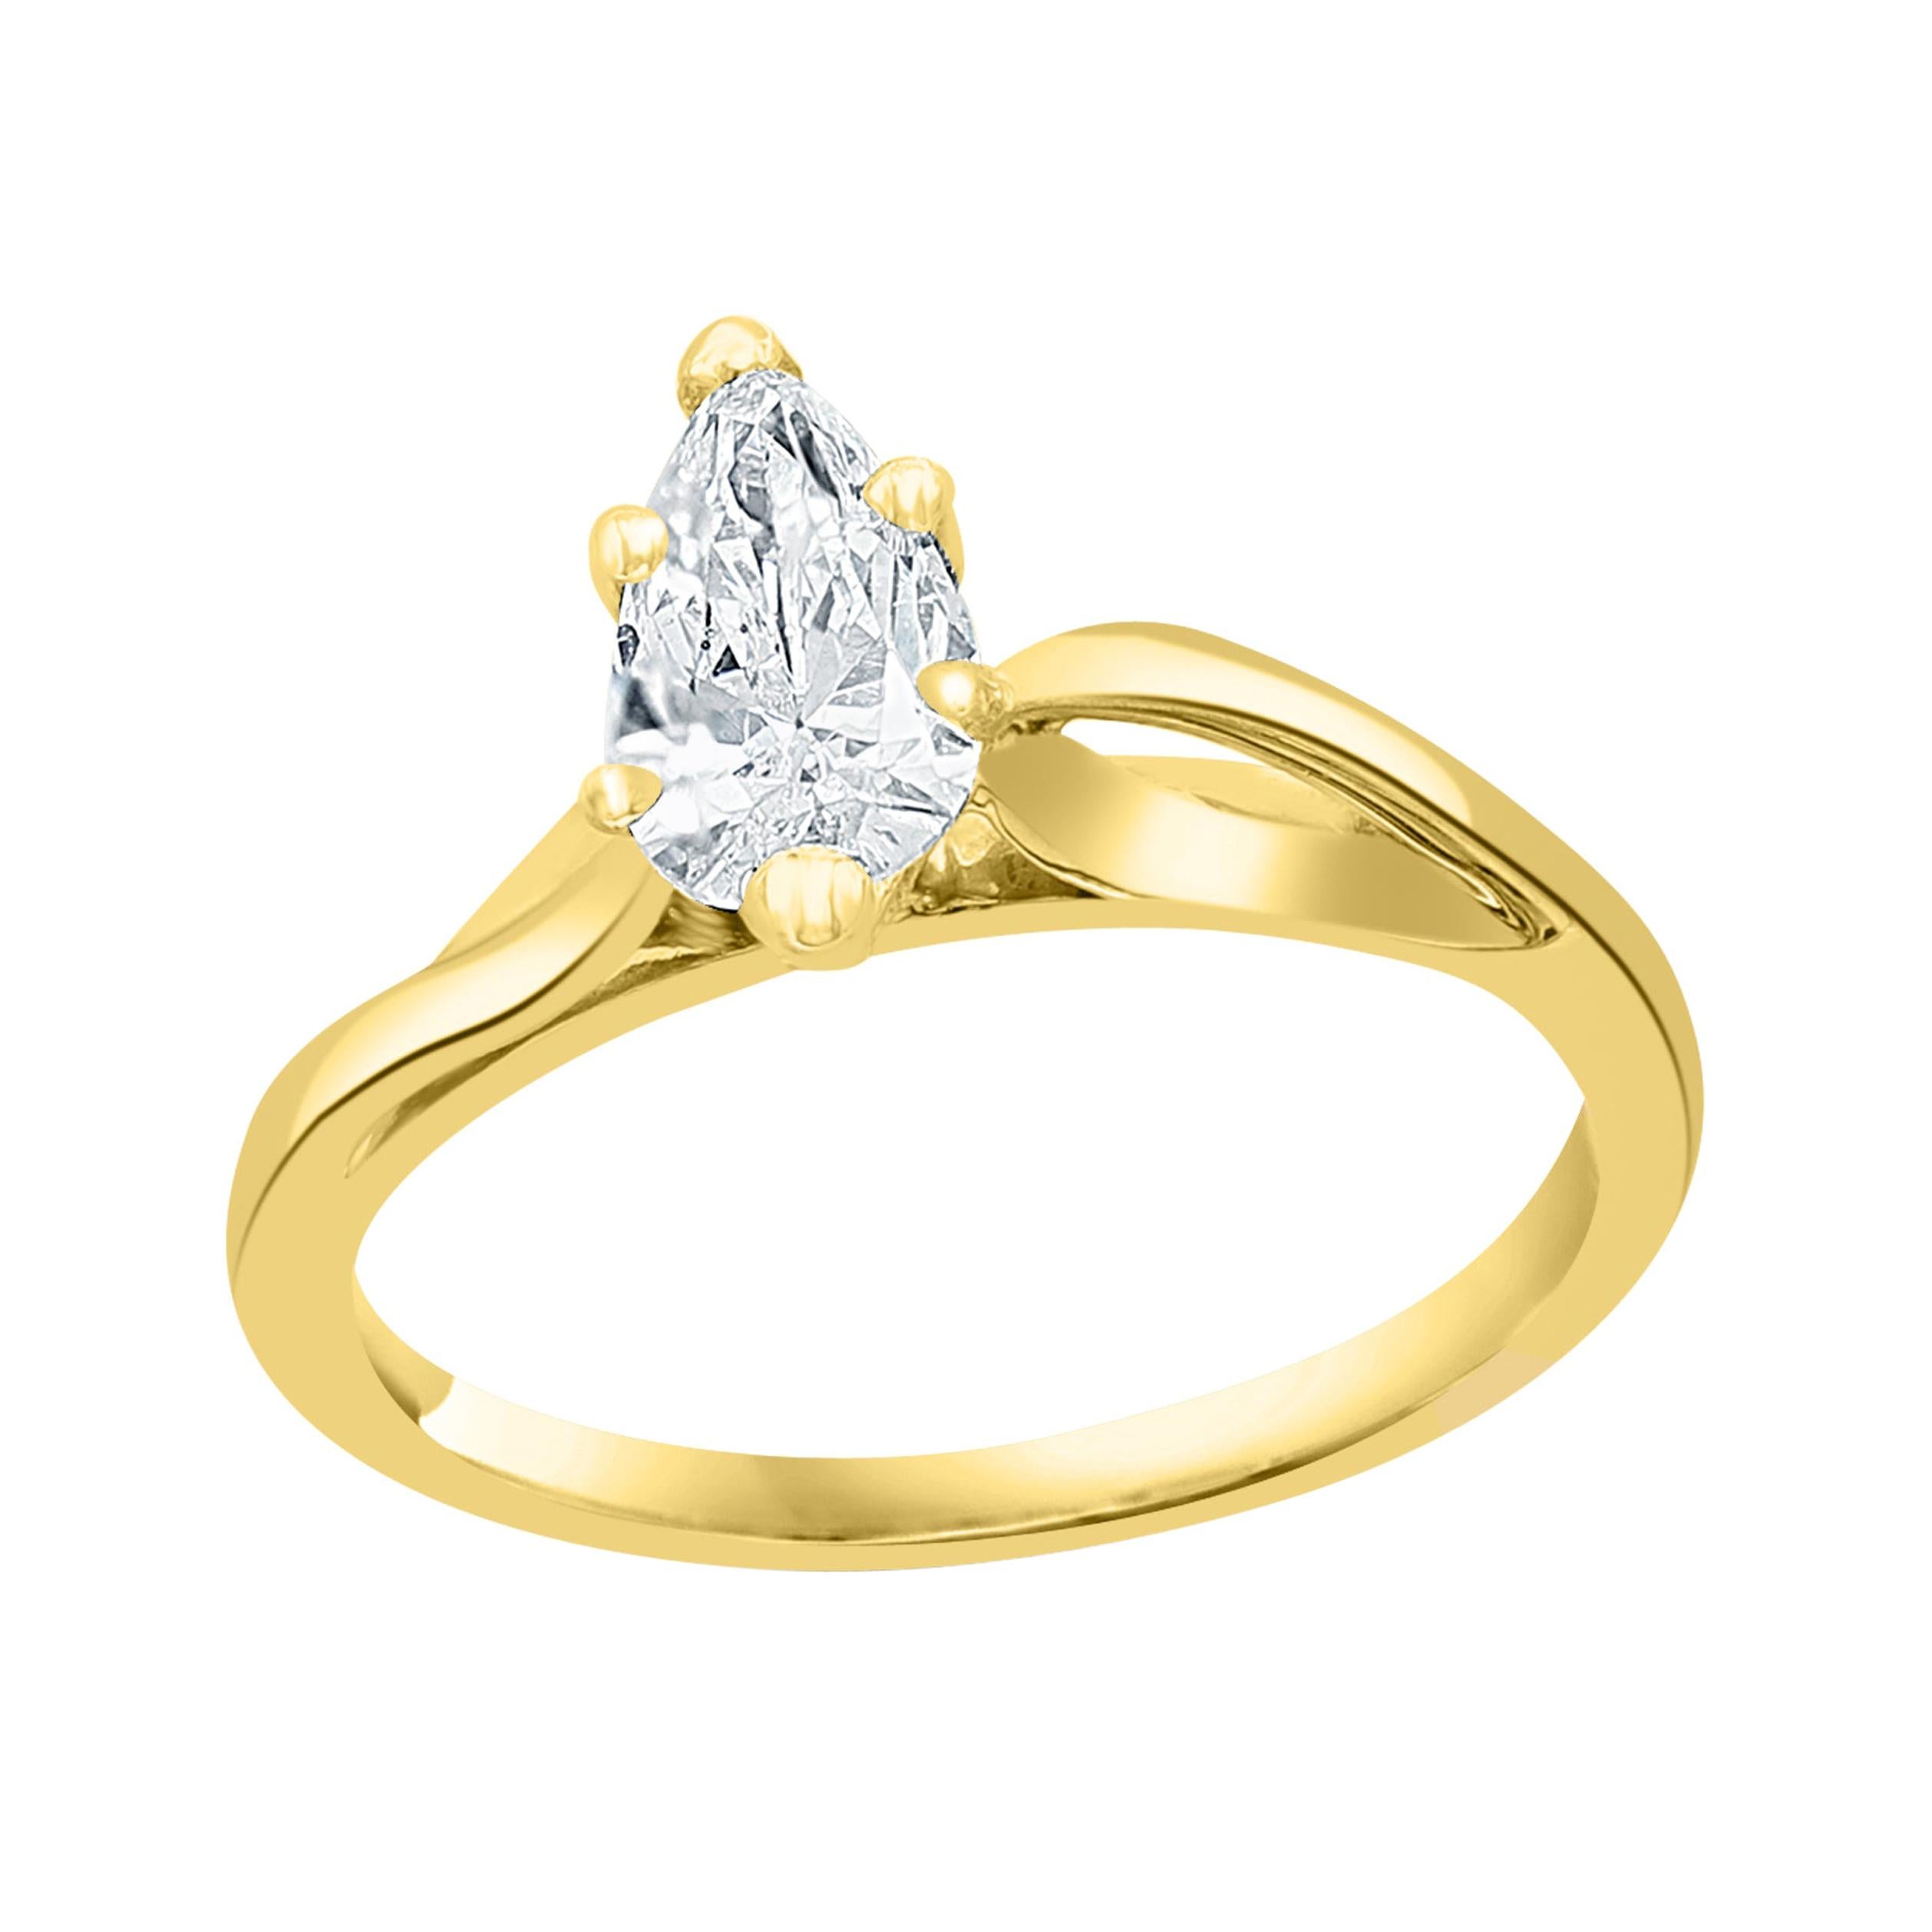 0.72 Carat Diamond Solitaire Pear Shape VS/E Engagement Ring 14 Kt Yellow Gold For Sale